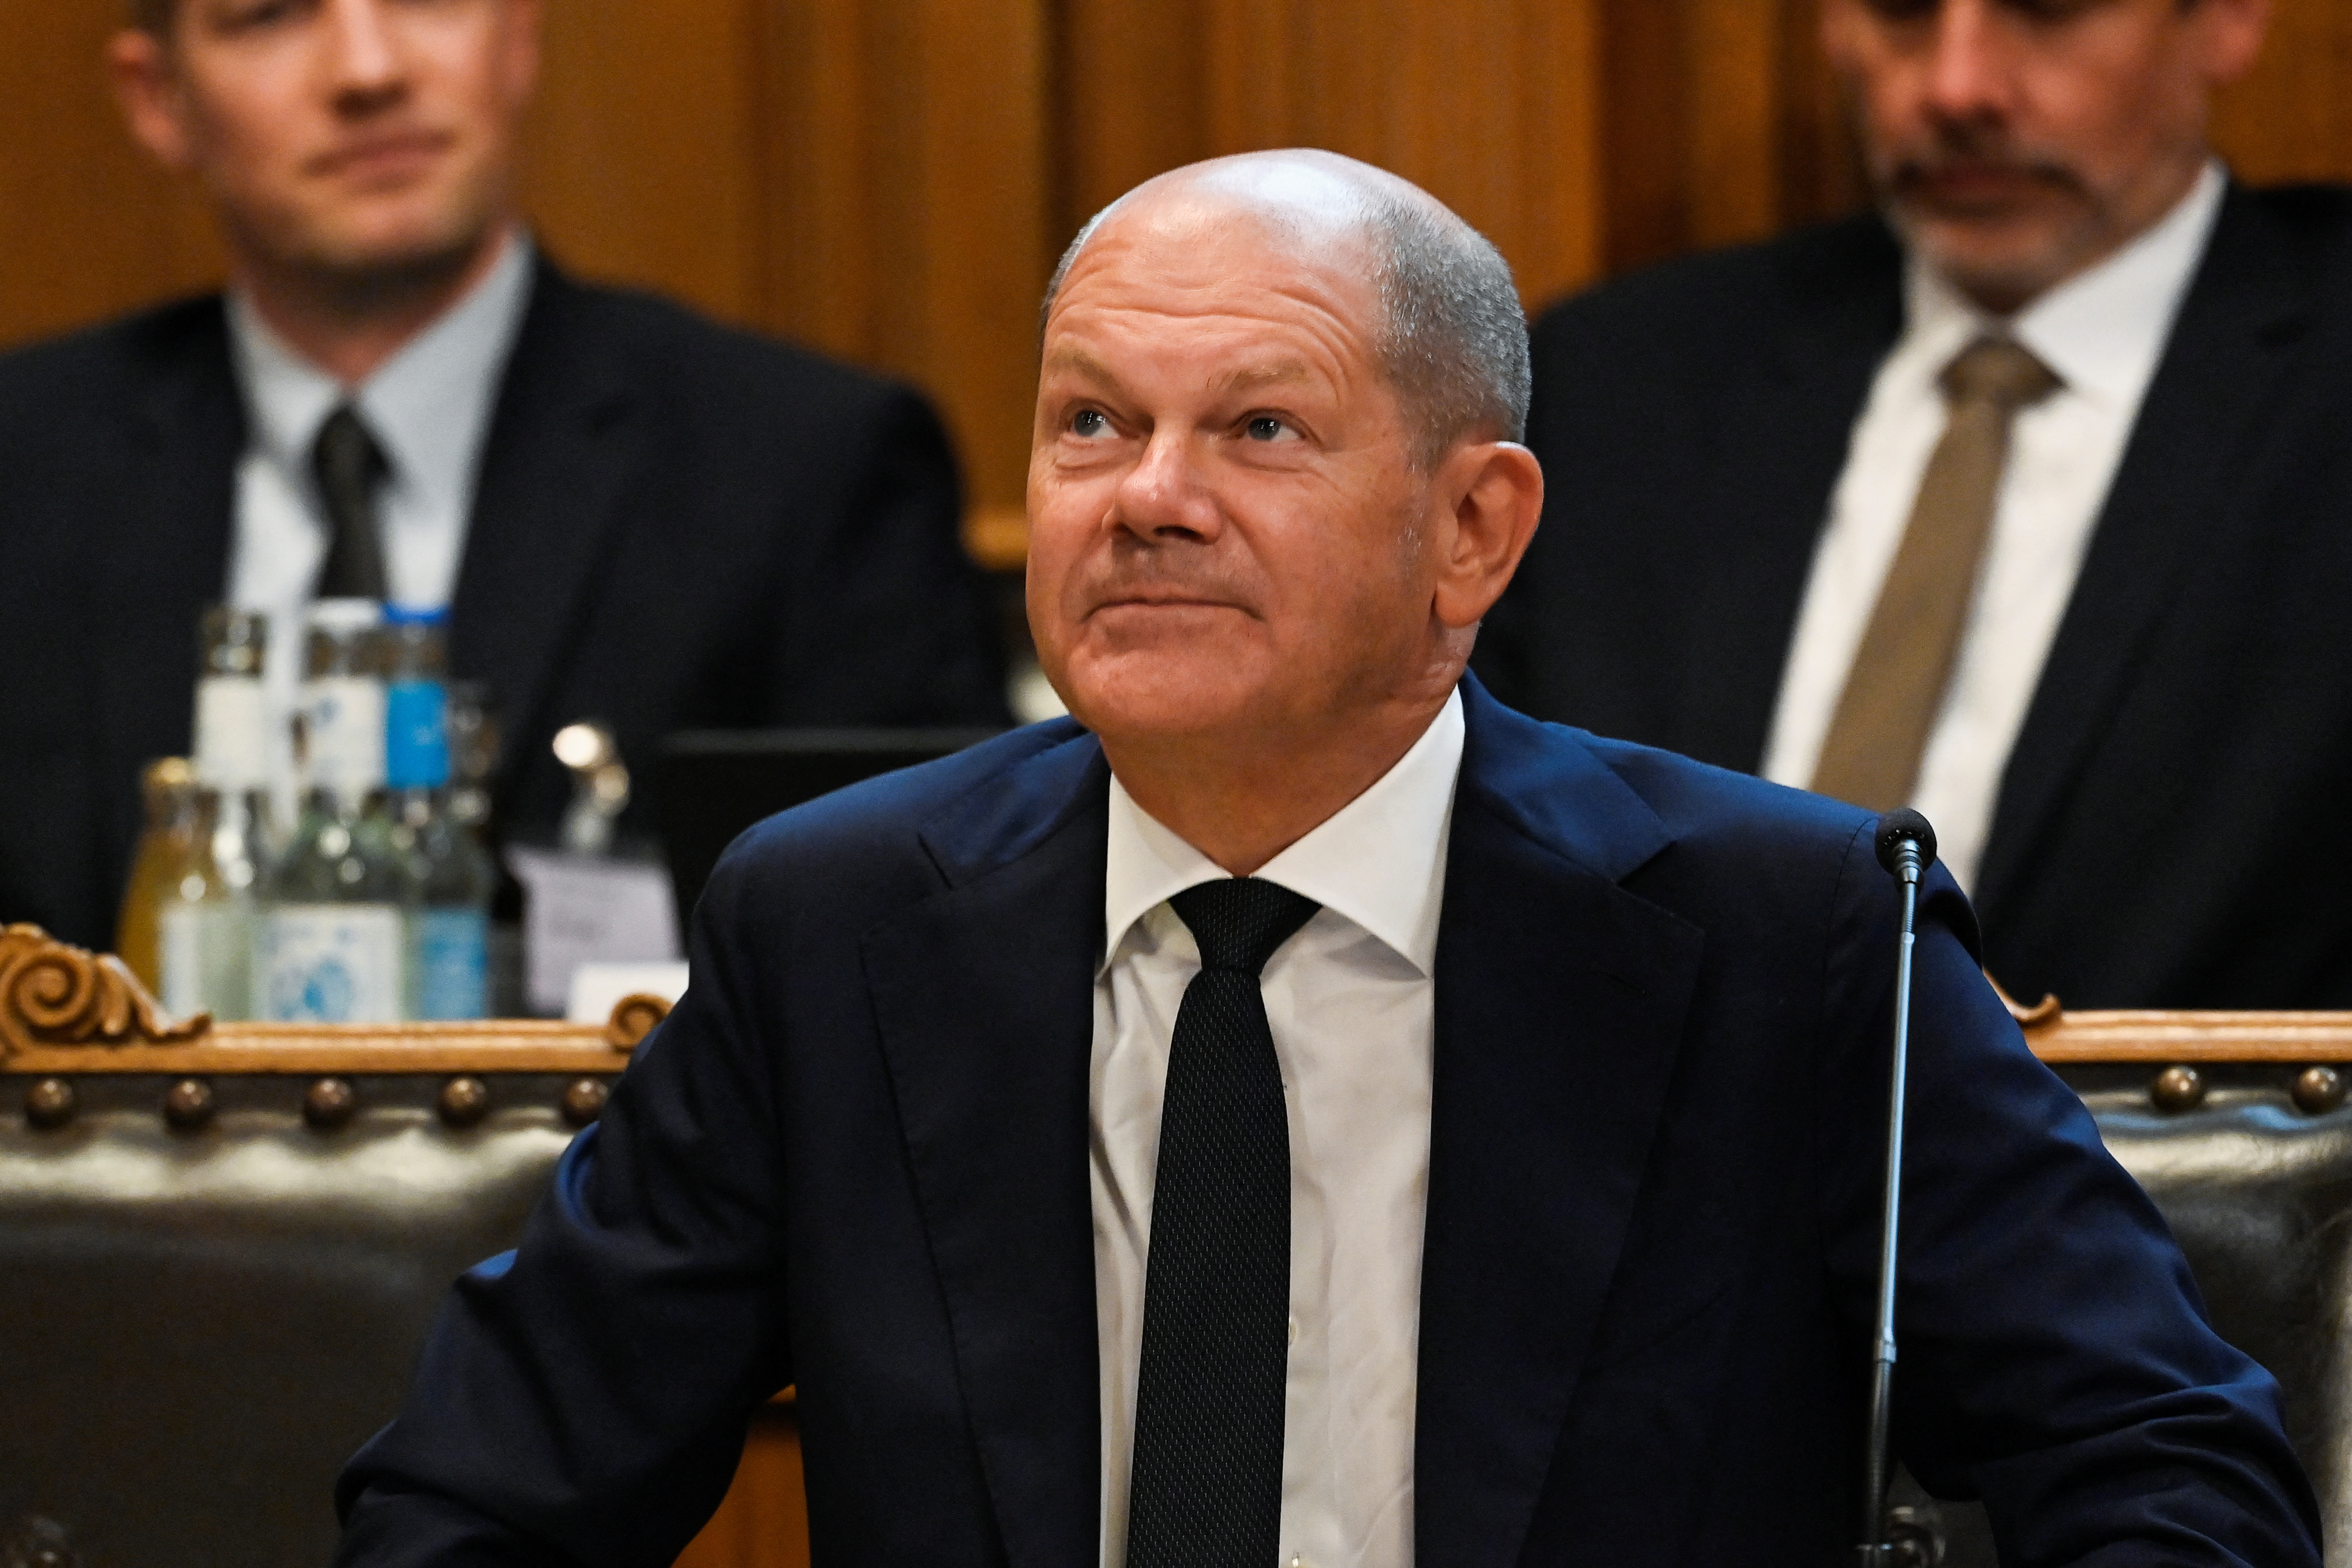 Germany's Chancellor Olaf Scholz to answer parliamentarians' questions on Cum-Ex affair, in Hamburg